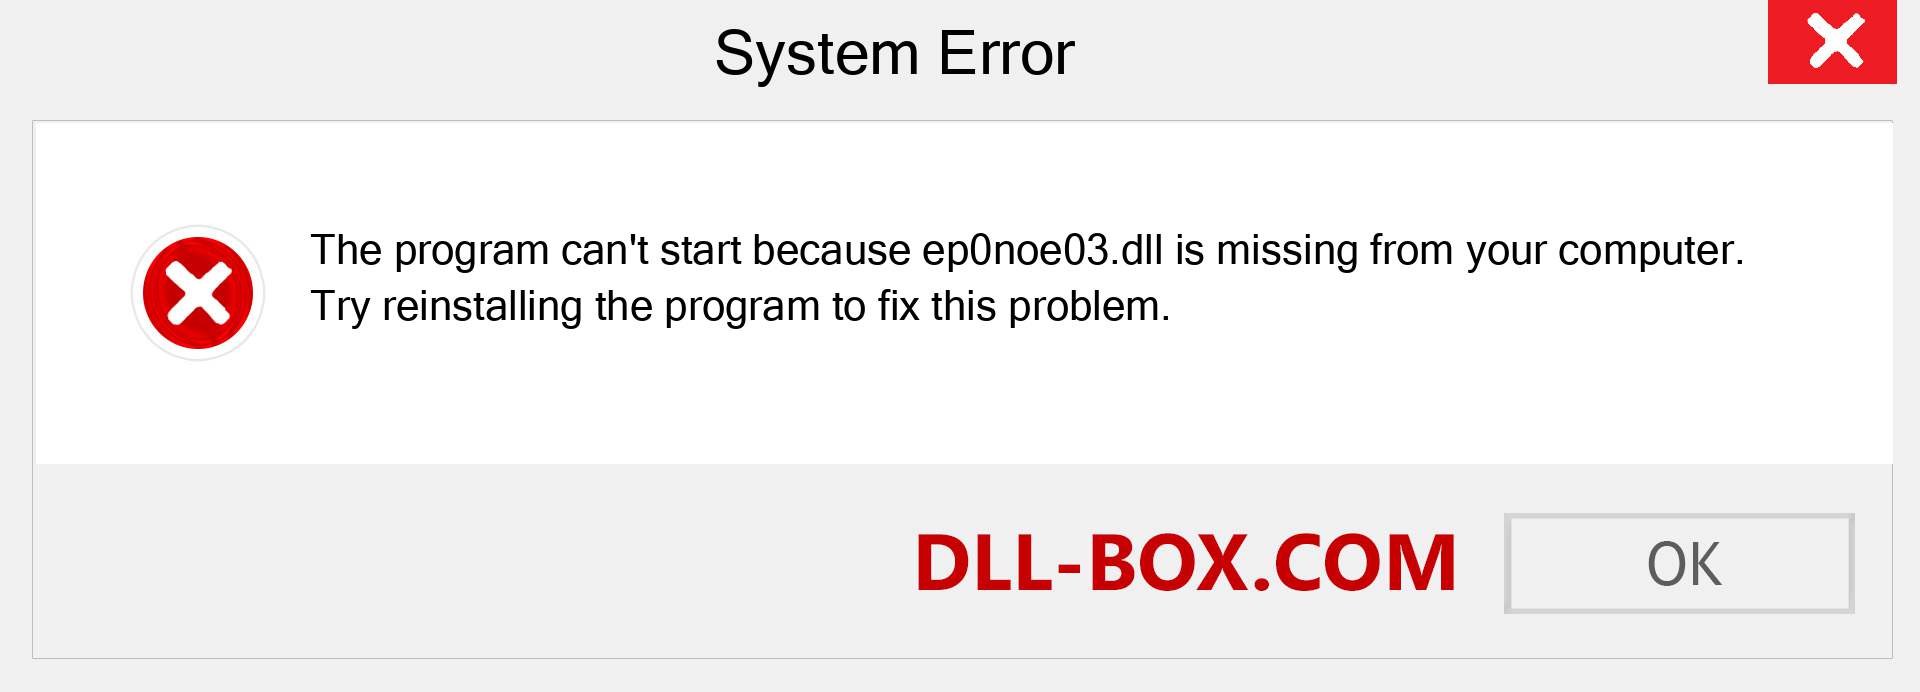  ep0noe03.dll file is missing?. Download for Windows 7, 8, 10 - Fix  ep0noe03 dll Missing Error on Windows, photos, images